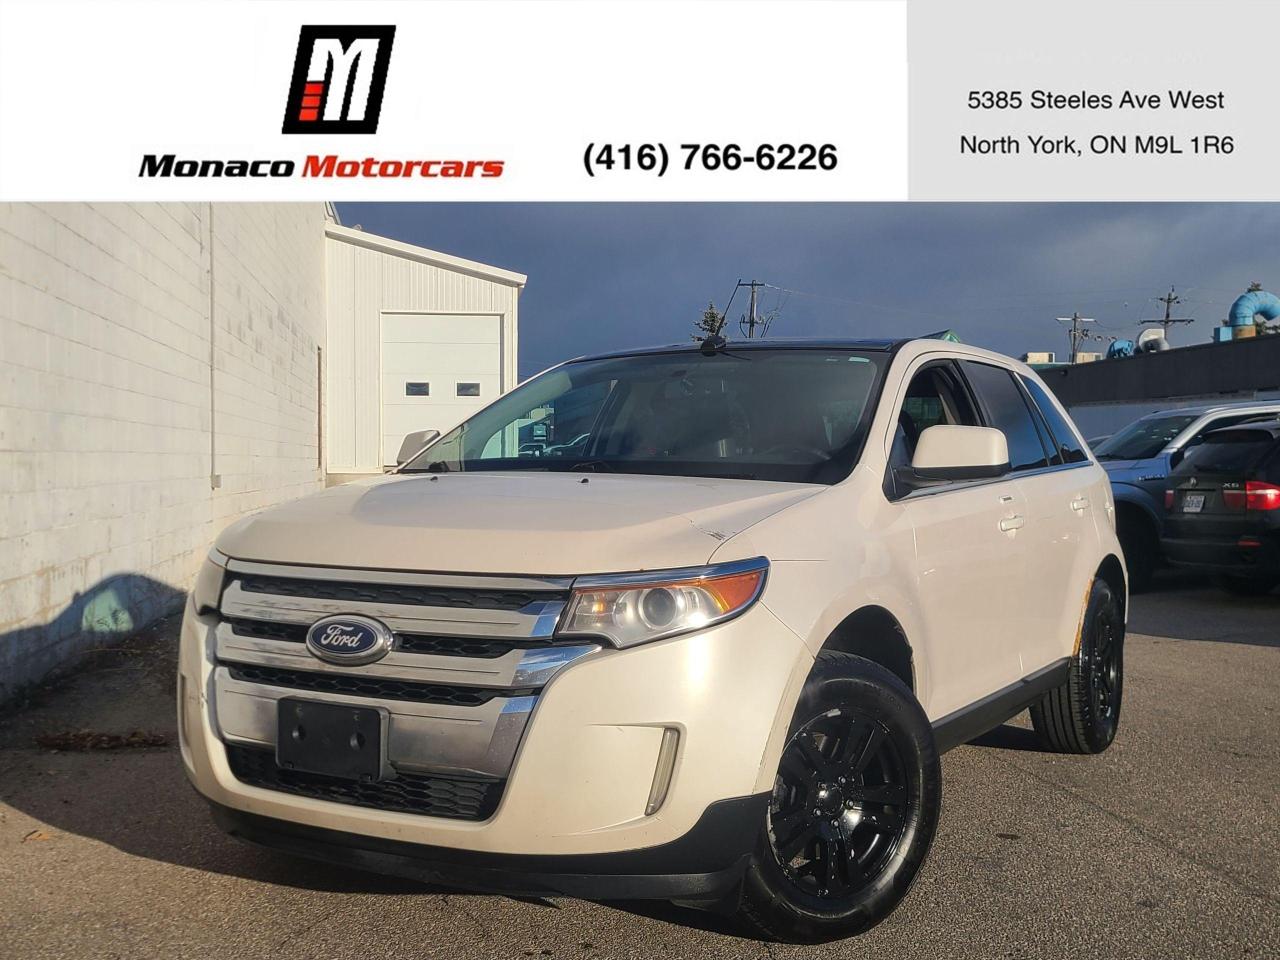 2011 Ford Edge LIMITED - AS IS VEHICLE|PANO|NAVI|REMOTE START - Photo #1